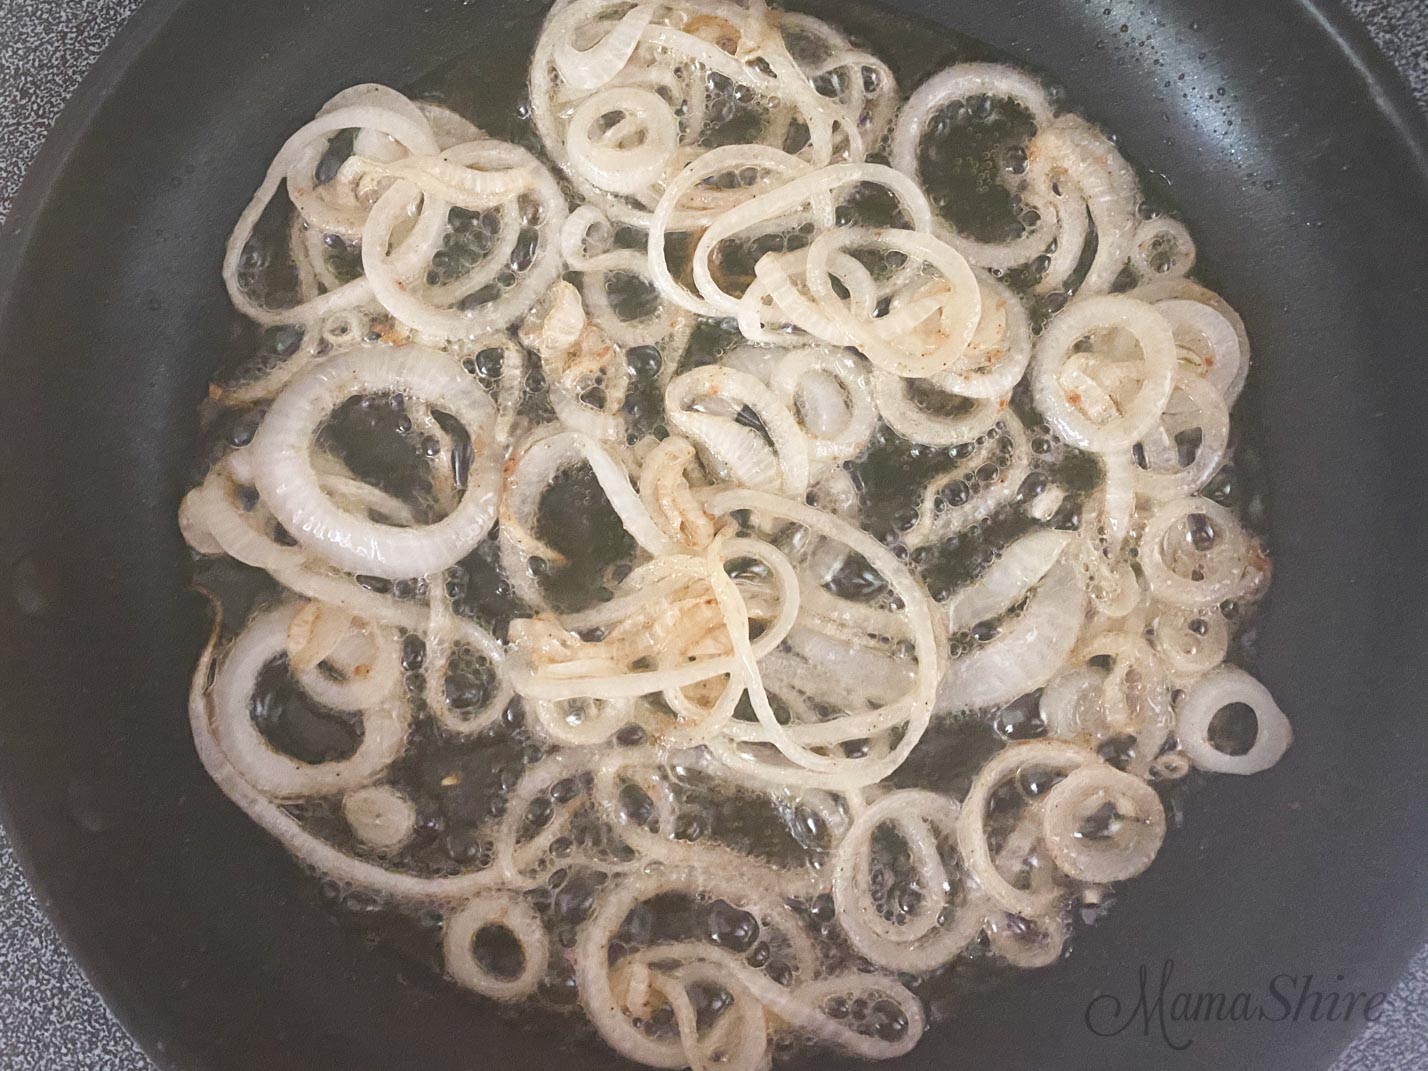 Sliced onions frying in a skillet.